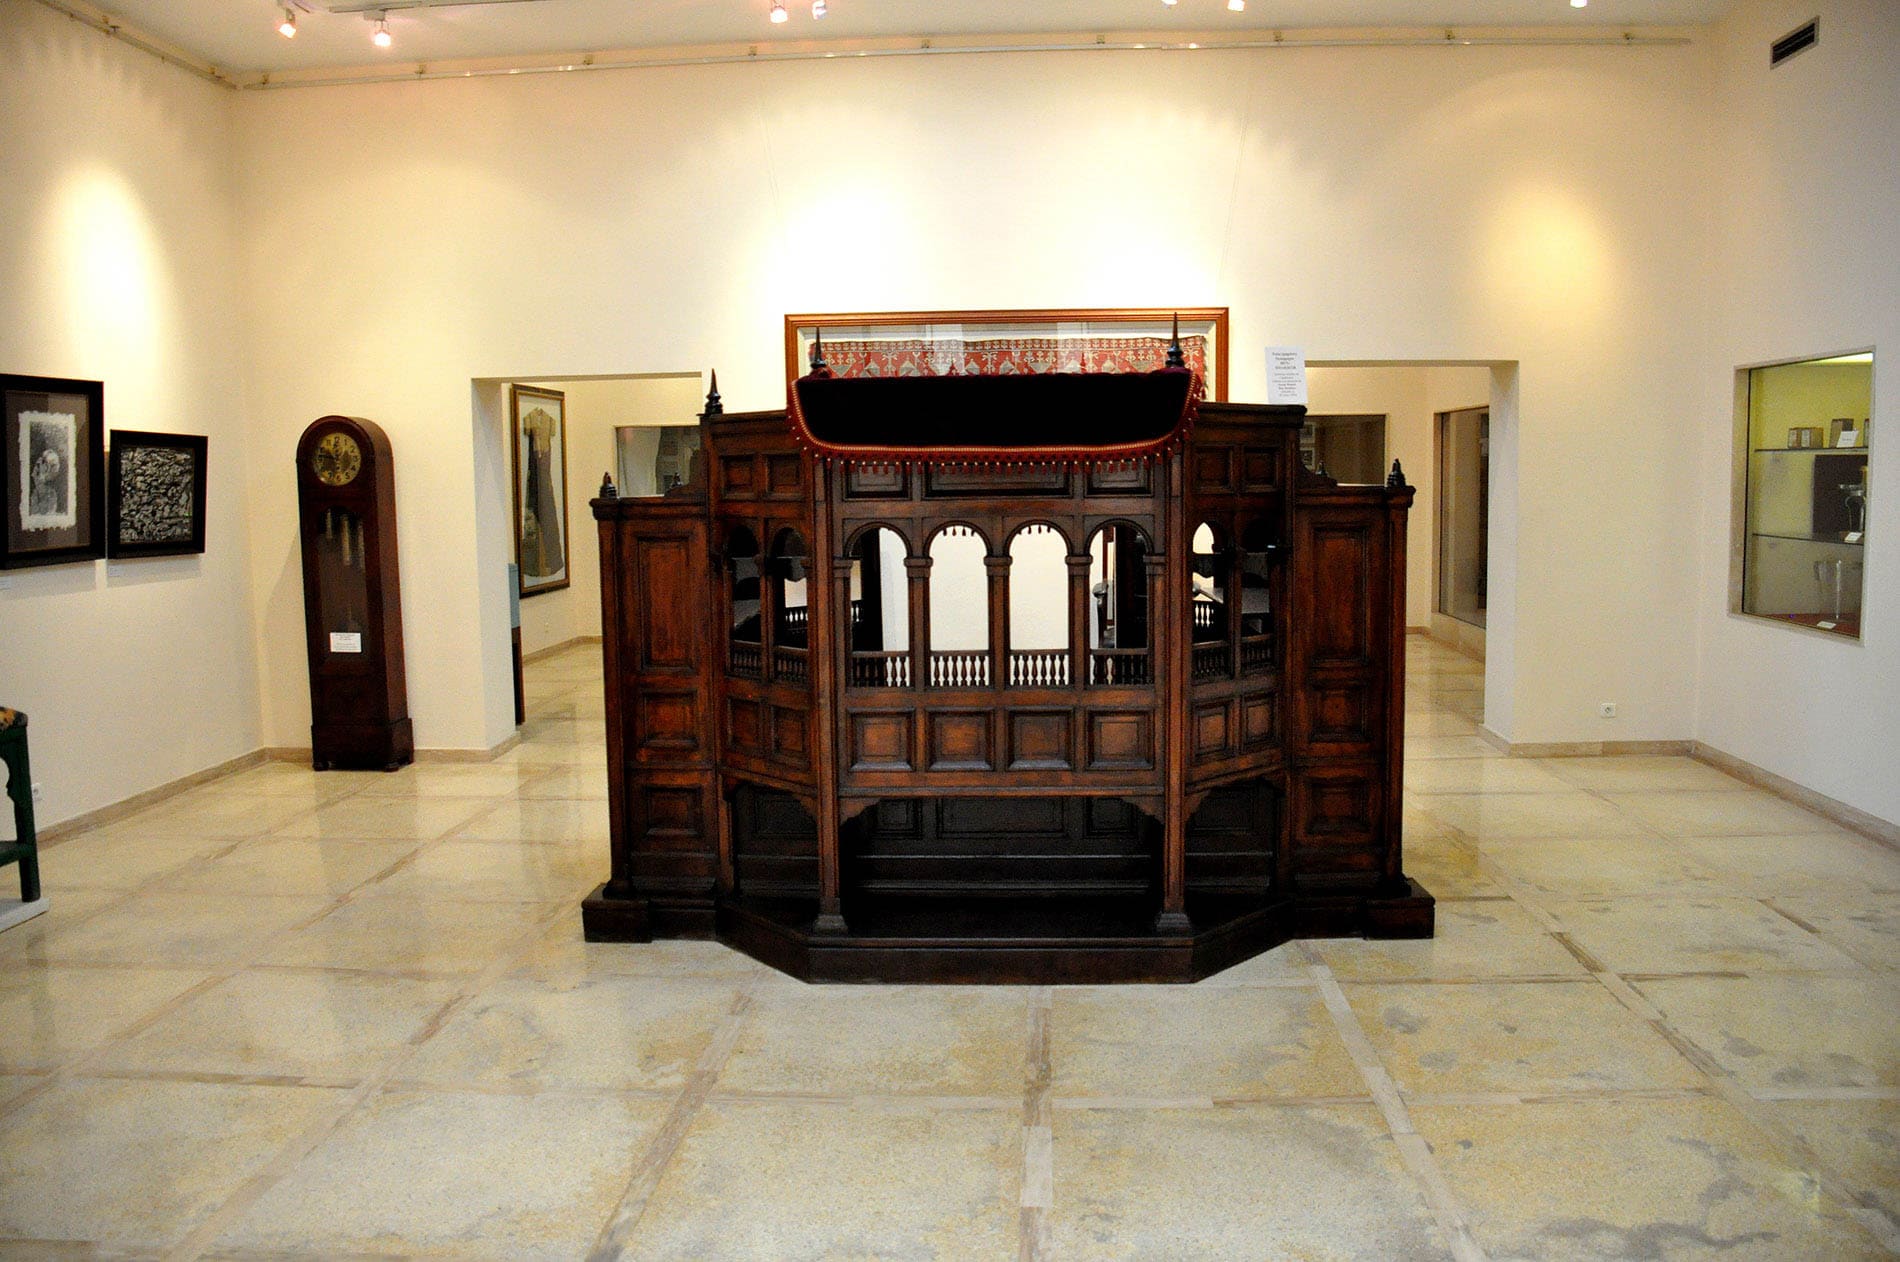 One_of_the_halls_at_the_Moroccan_Jewish_Museum_Casablanca